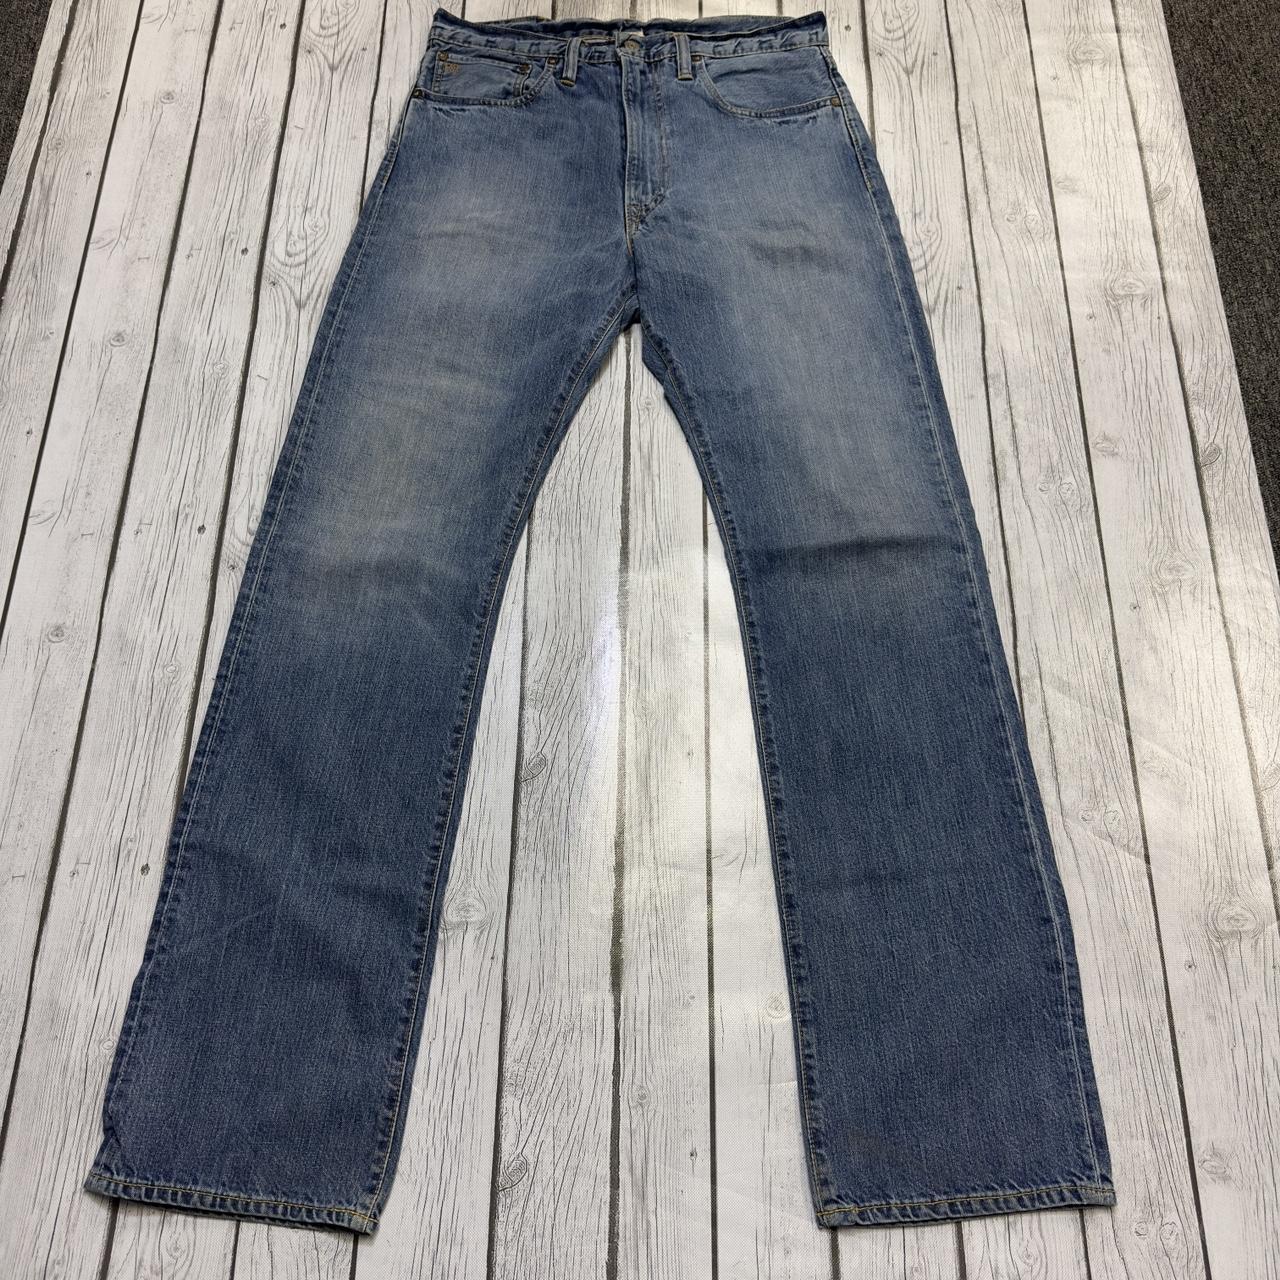 RRL straight leg jeans in blue. From the 2000s. Mens... - Depop